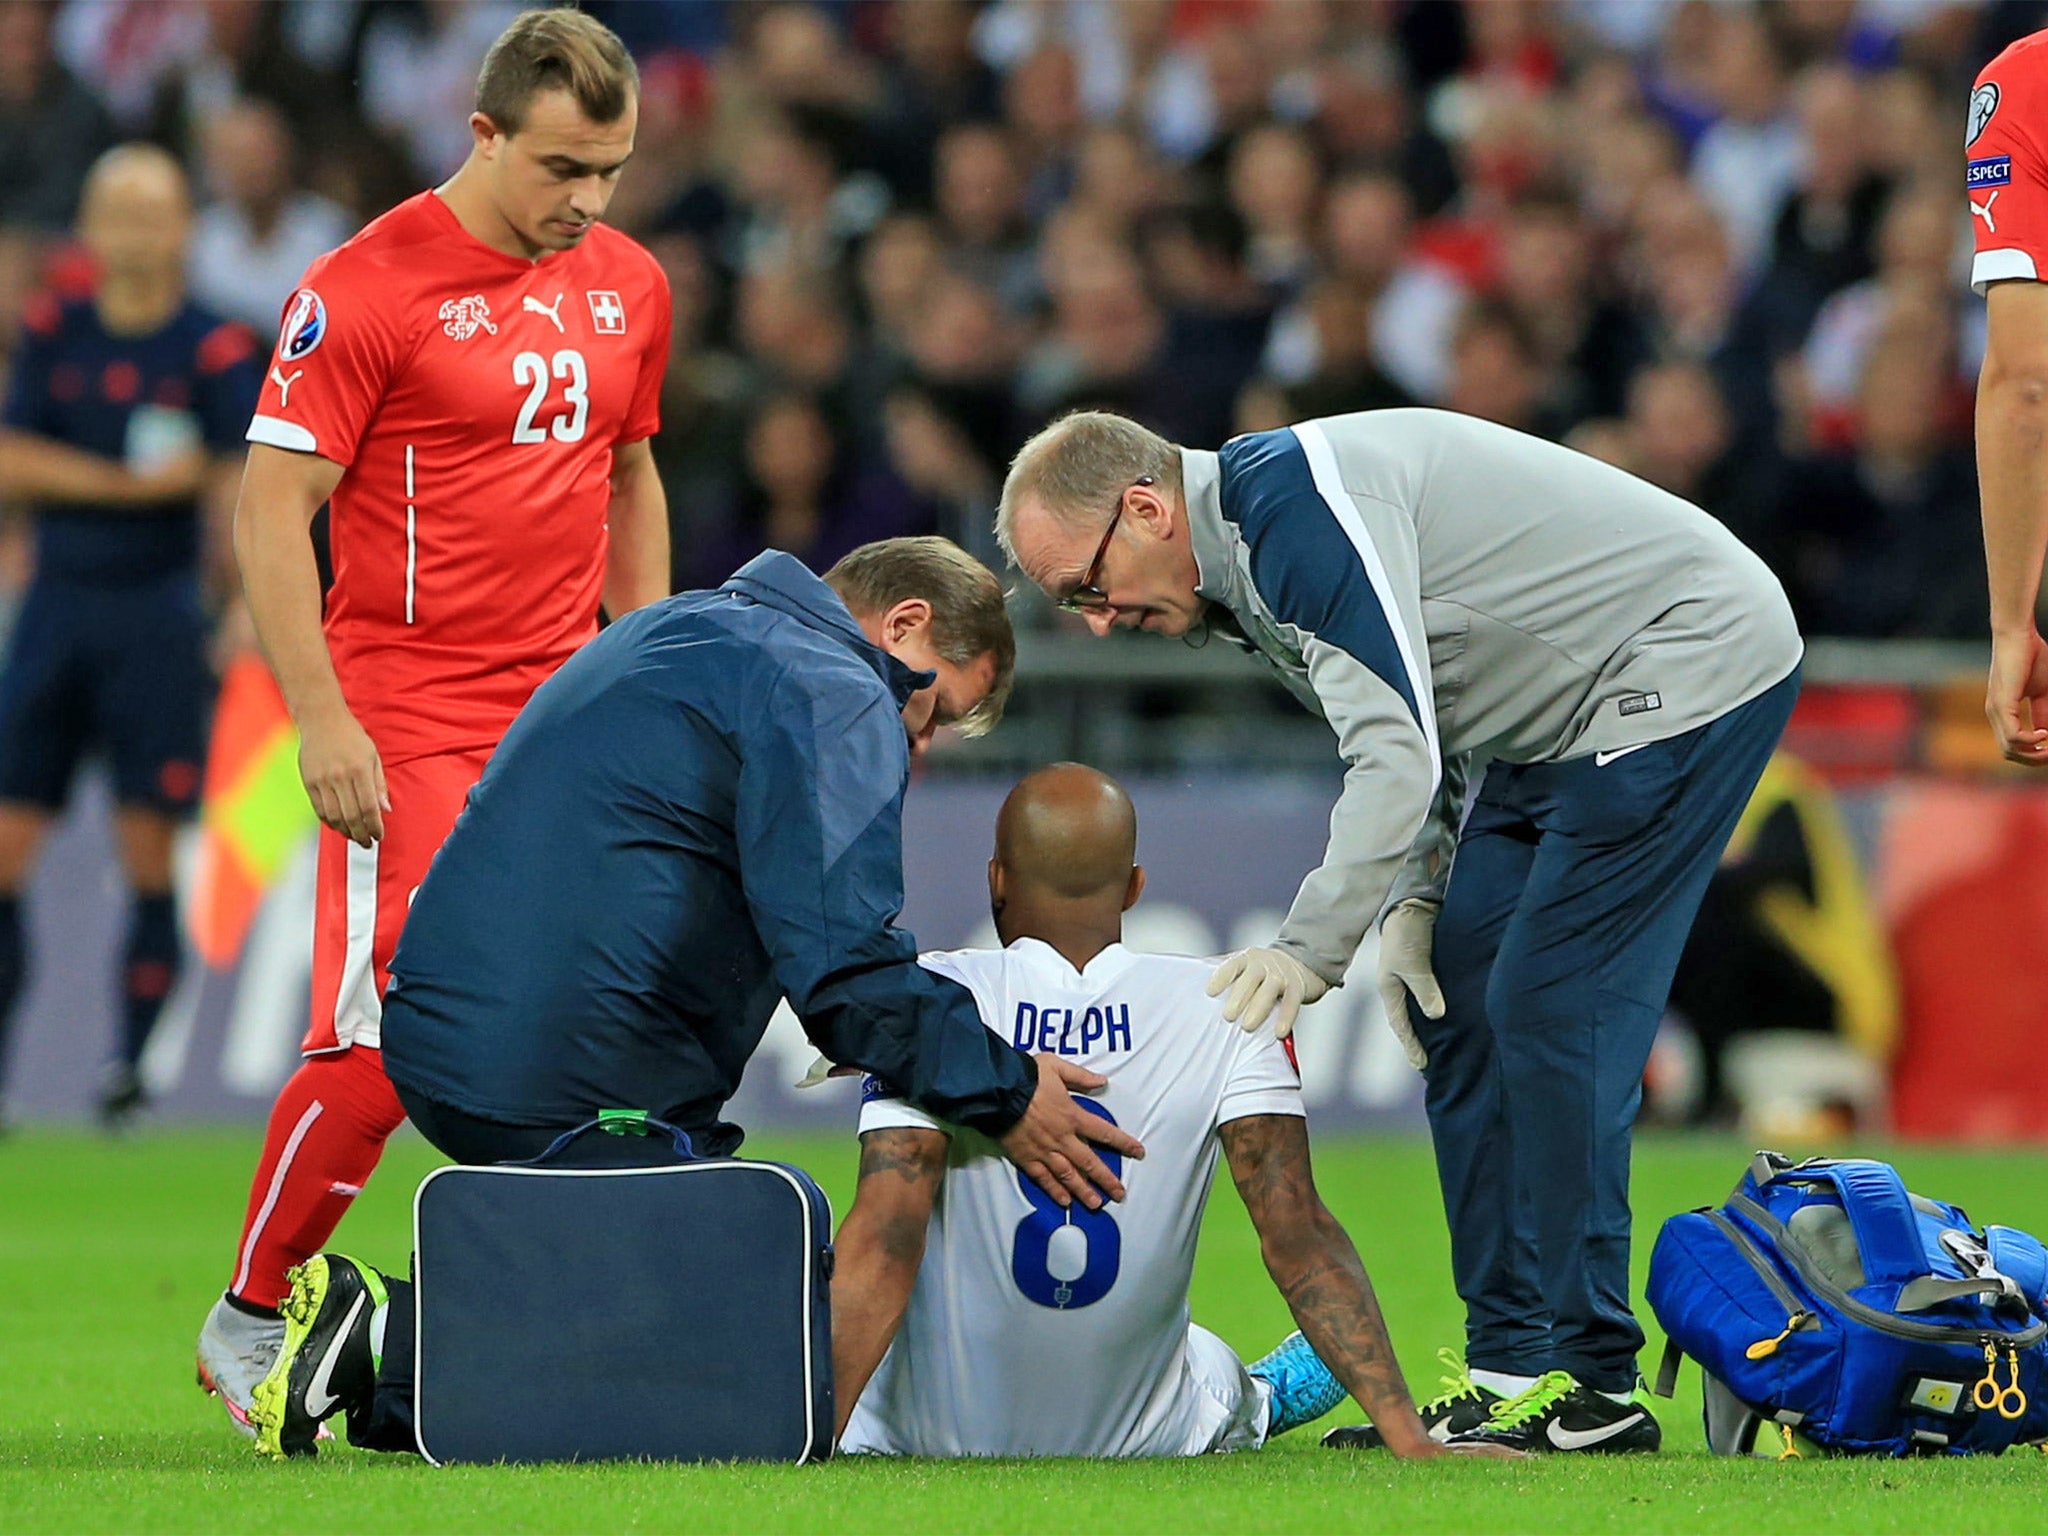 Fabian Delph receives treatment on the pitch